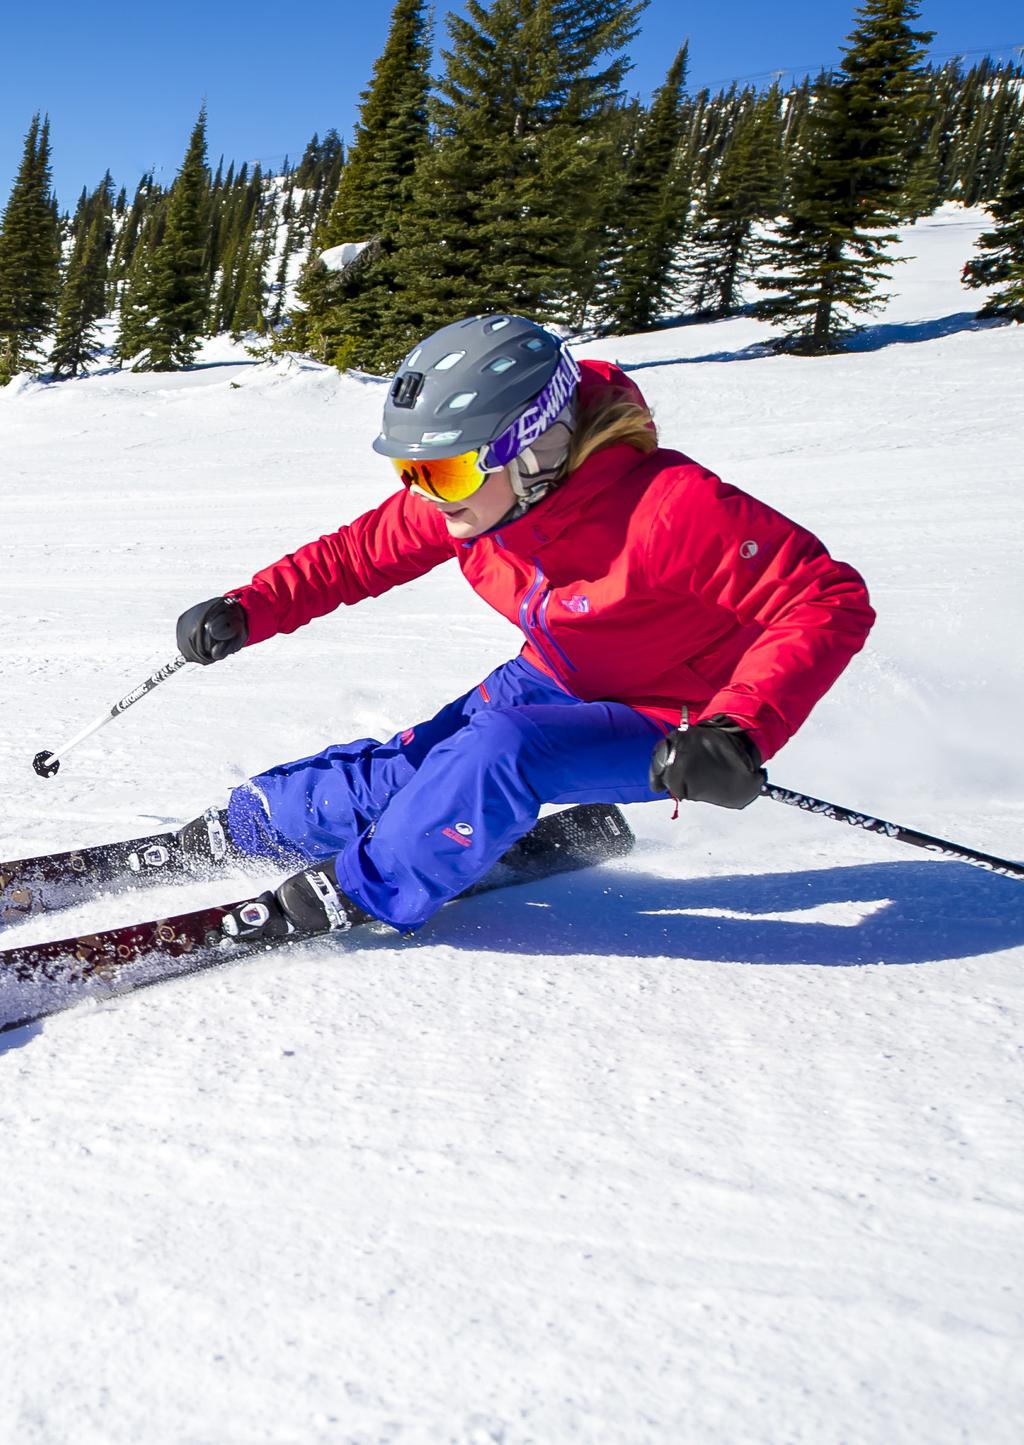 At Big White Ski Resort we are proud of our reputation for providing quality group trips at exceptional value.